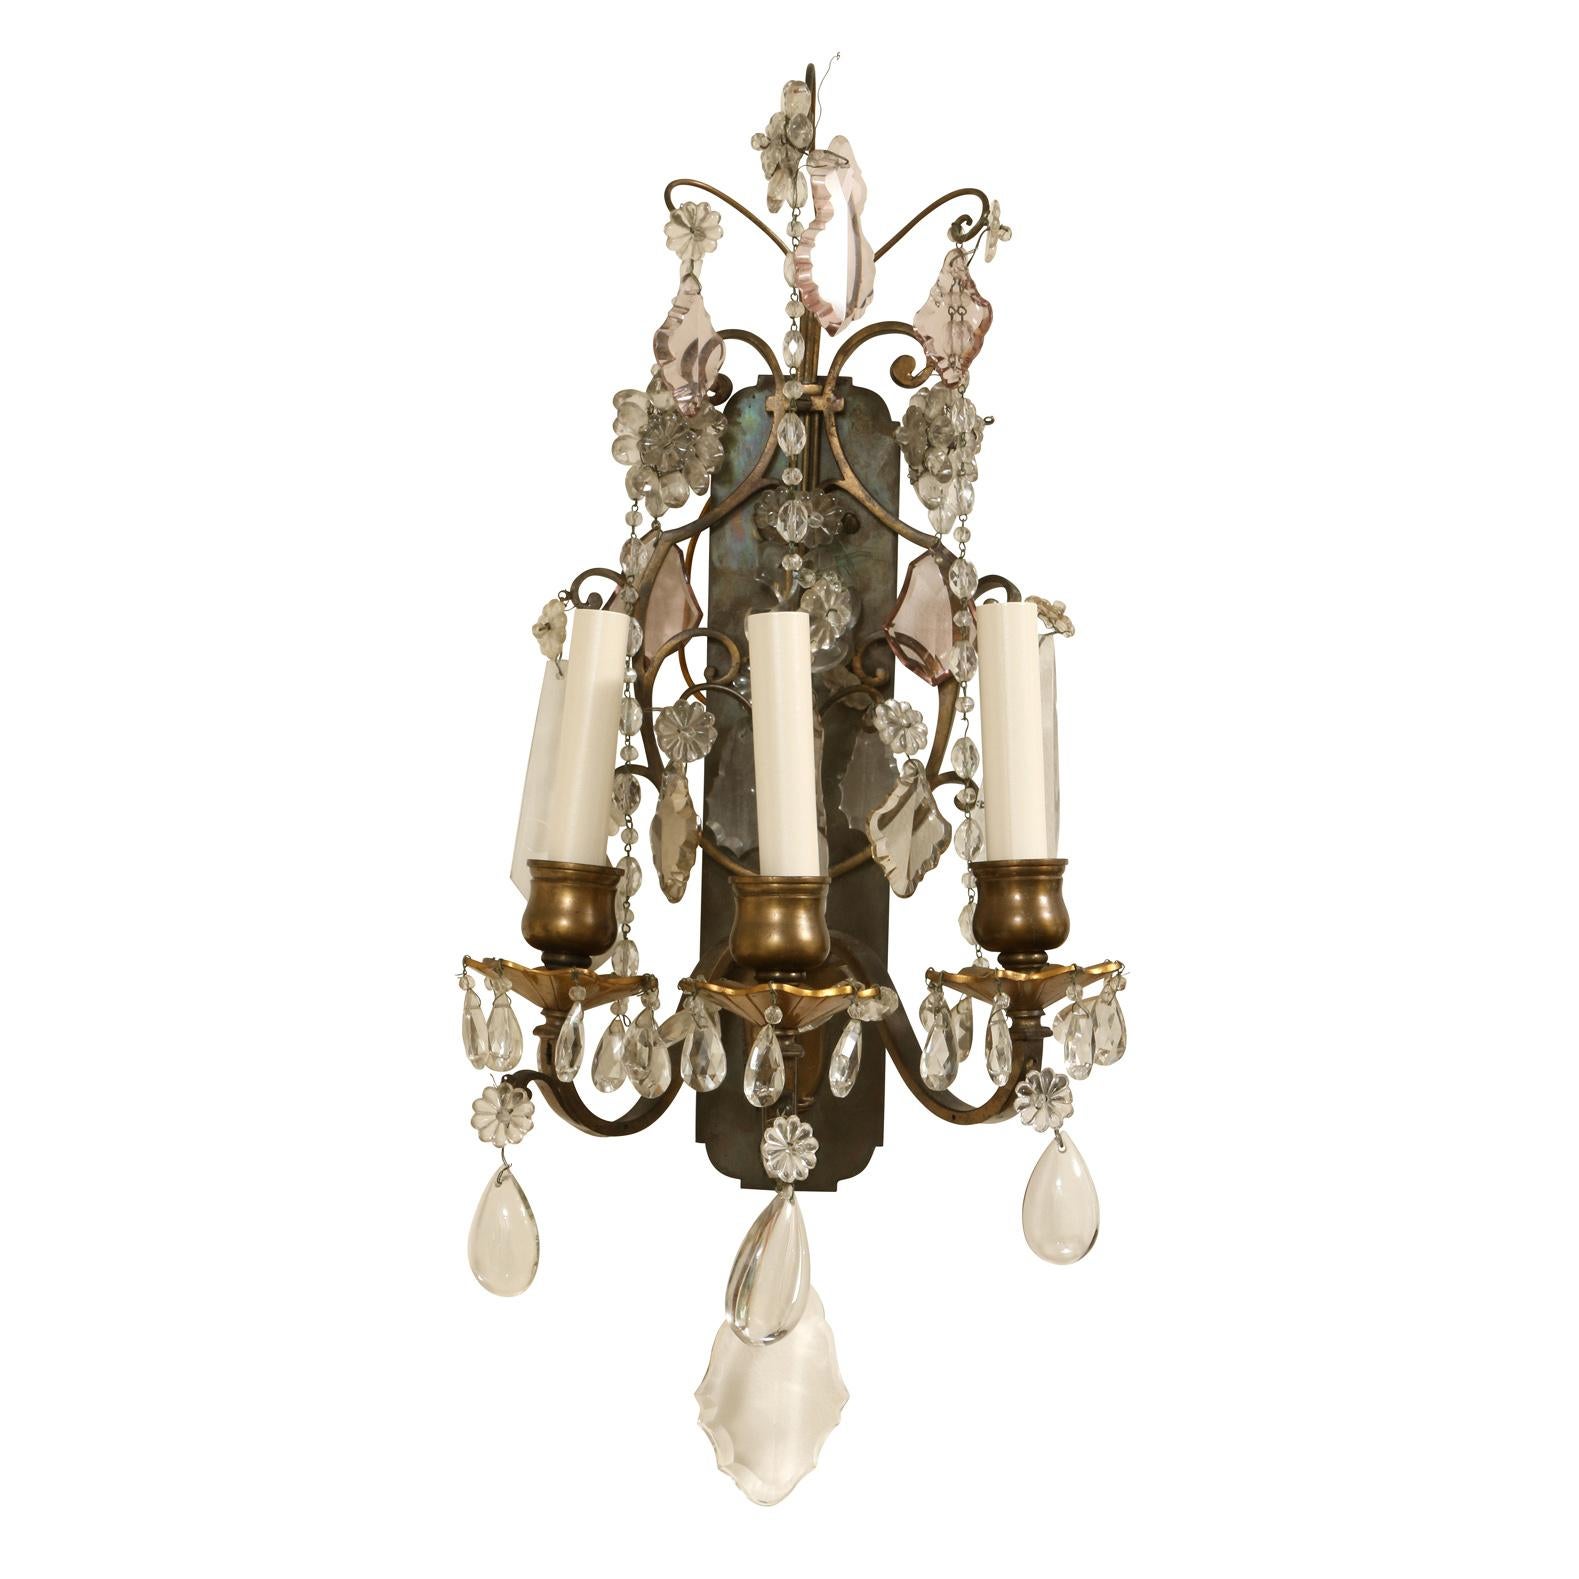 A vintage pair of French three arm sconces with beaded crystal swags, drops and attached crystal florettes. Patina to body of each sconce. Predominantly clear crystals with amber colored hanging crystals at top.